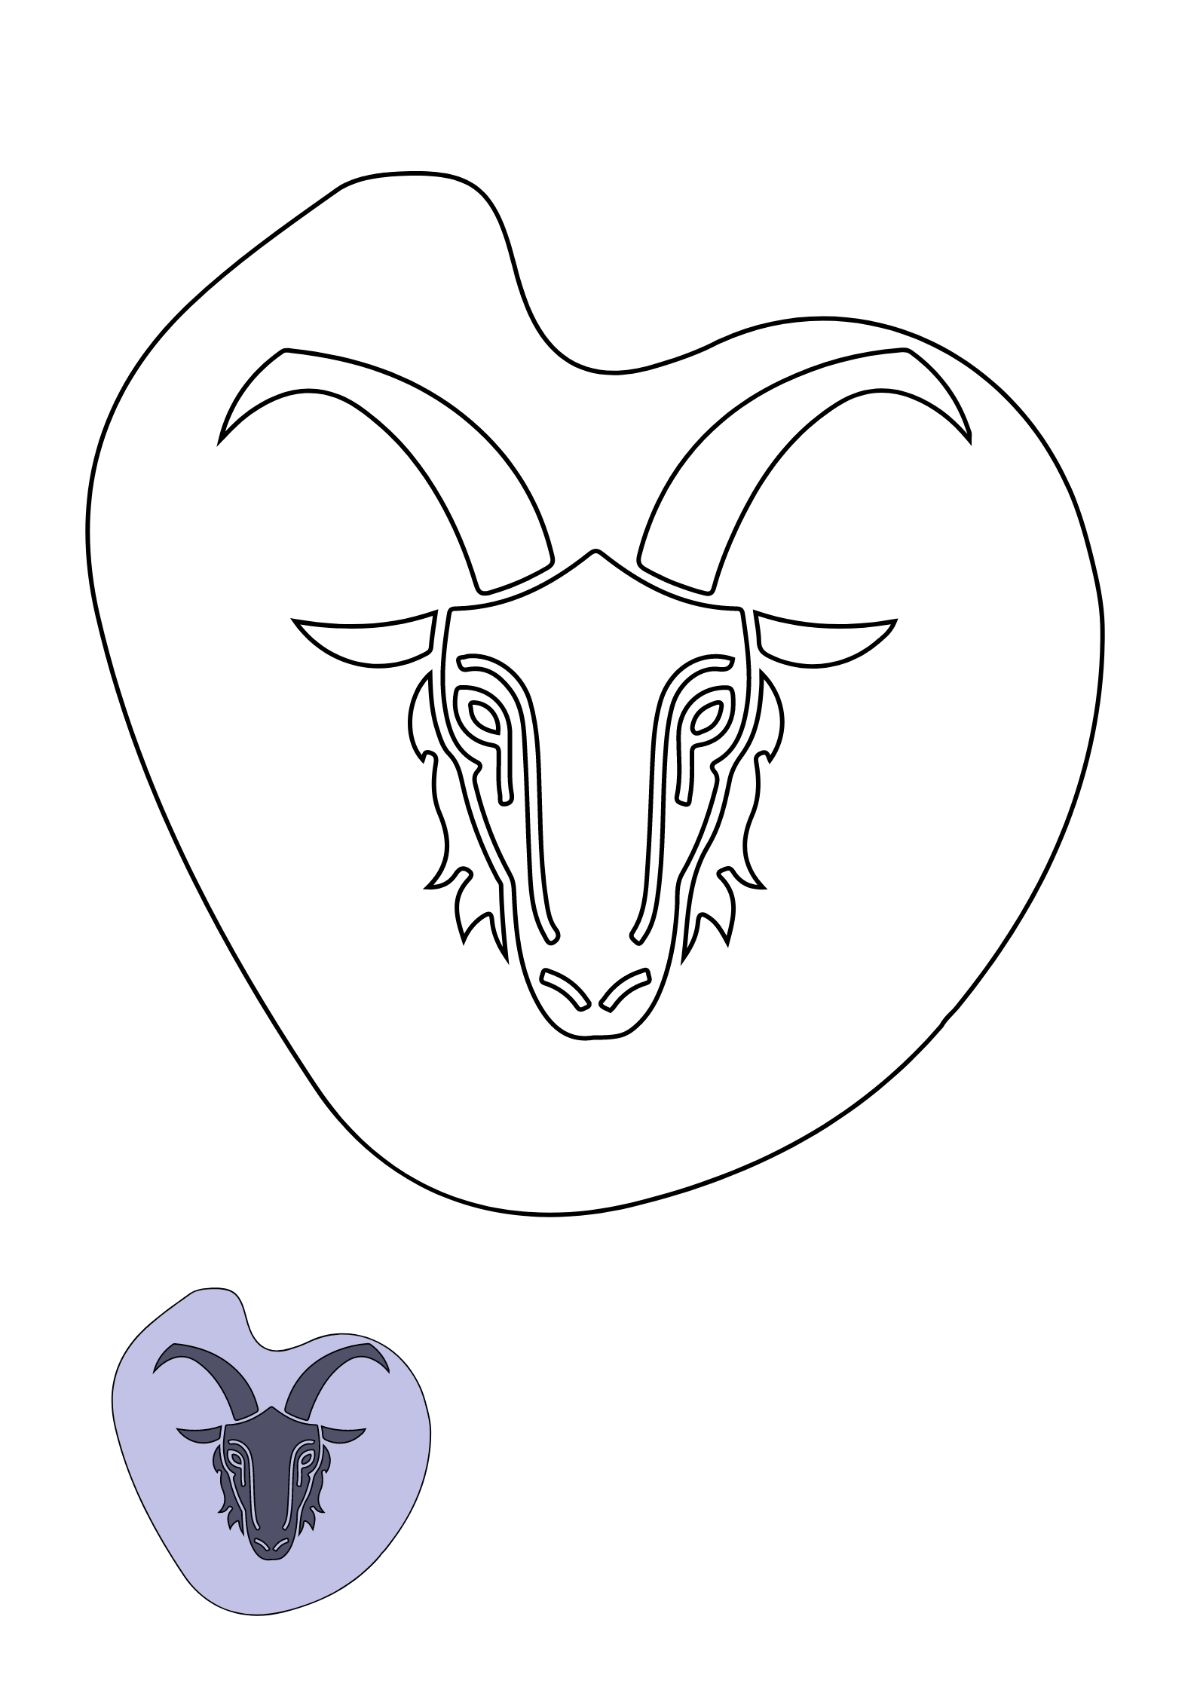 Capricorn Head coloring page Template